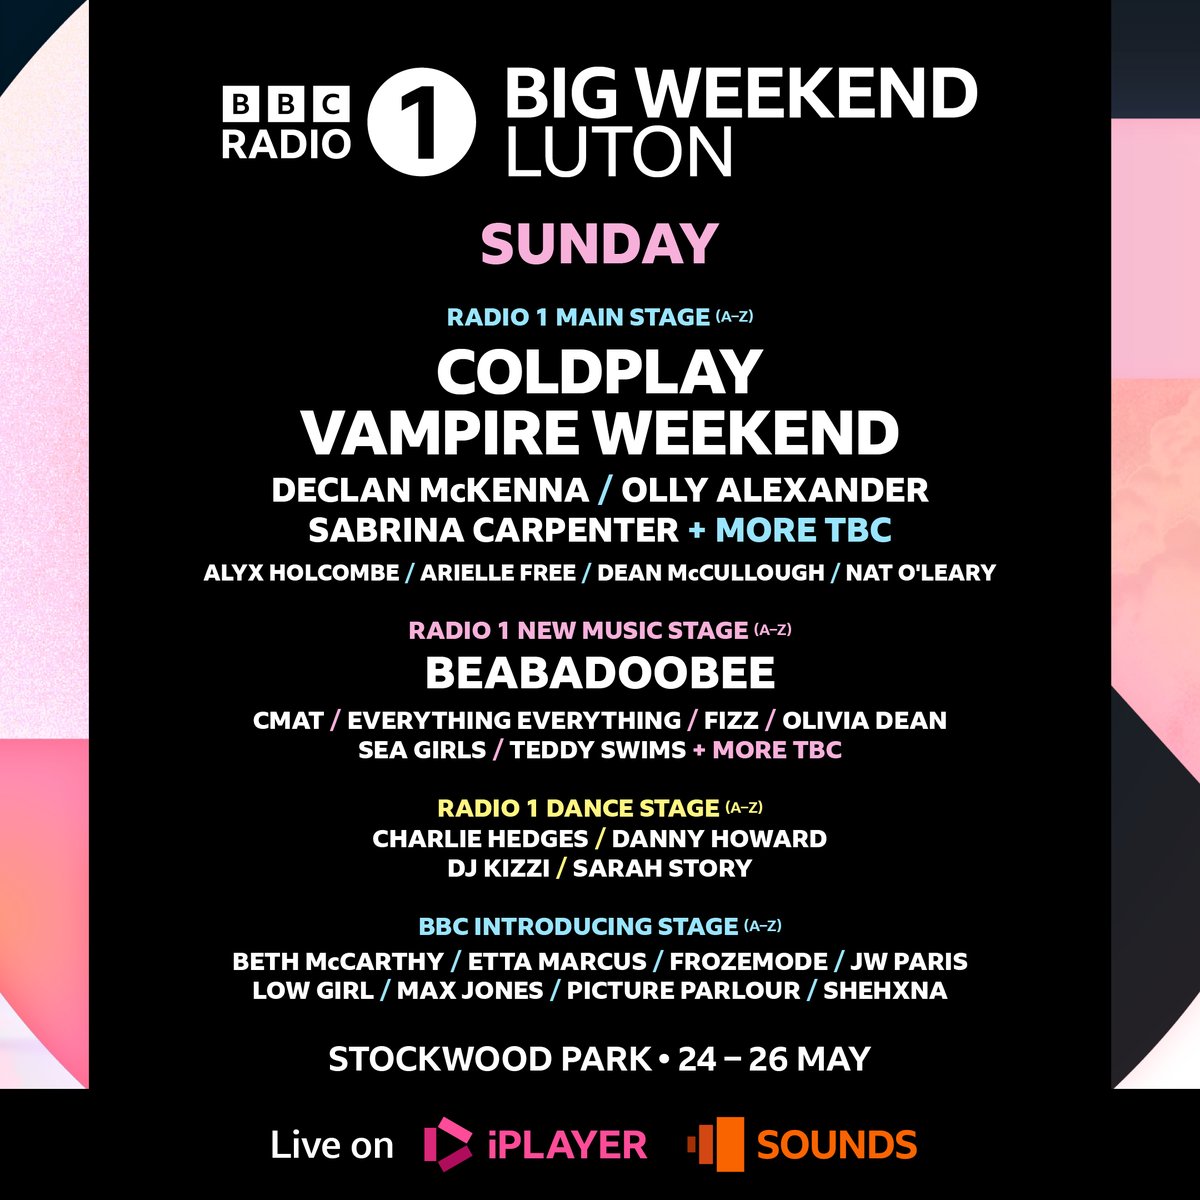 We'll be closing out #BigWeekend Luton with a headline performance from @coldplay on Sunday 26th May! ✨ For more details and info on tickets, visit bbc.co.uk/bigweekend